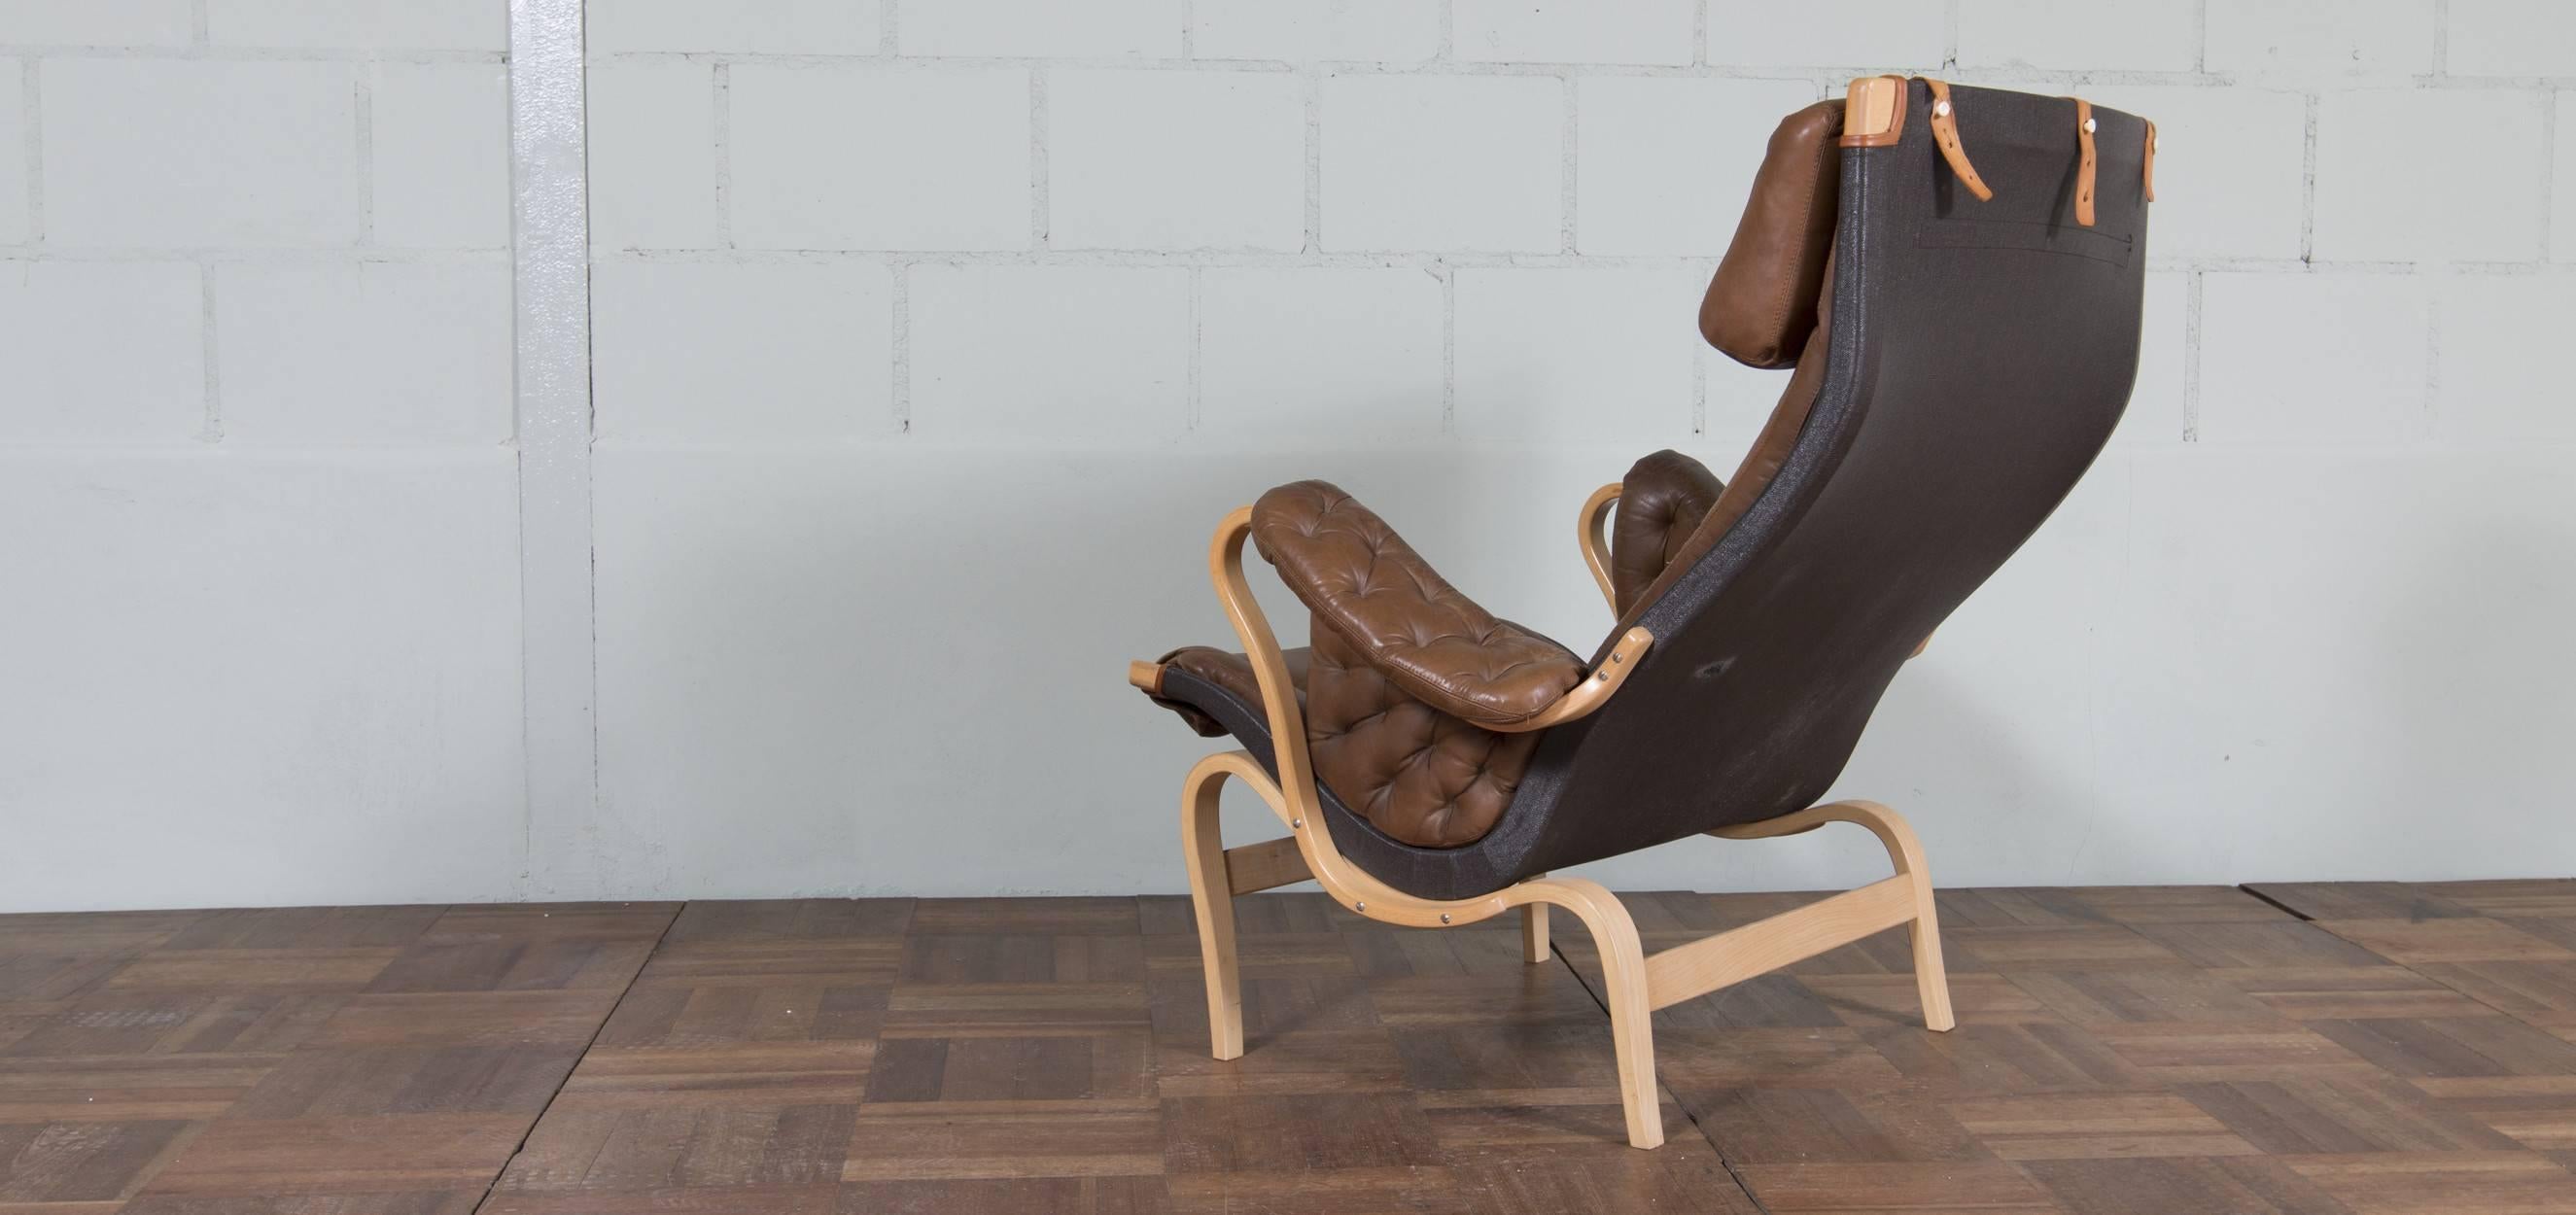 Bruno Mathsson Pernilla lounge chair produced by DUX, DUX is a company located in Sweden. The Pernilla lounge chair designed by Bruno Mathsson in 1969.

Bruno Matthson designed the Pernilla chair originally in 1944. DUX’s Perinilla is Bruno’s